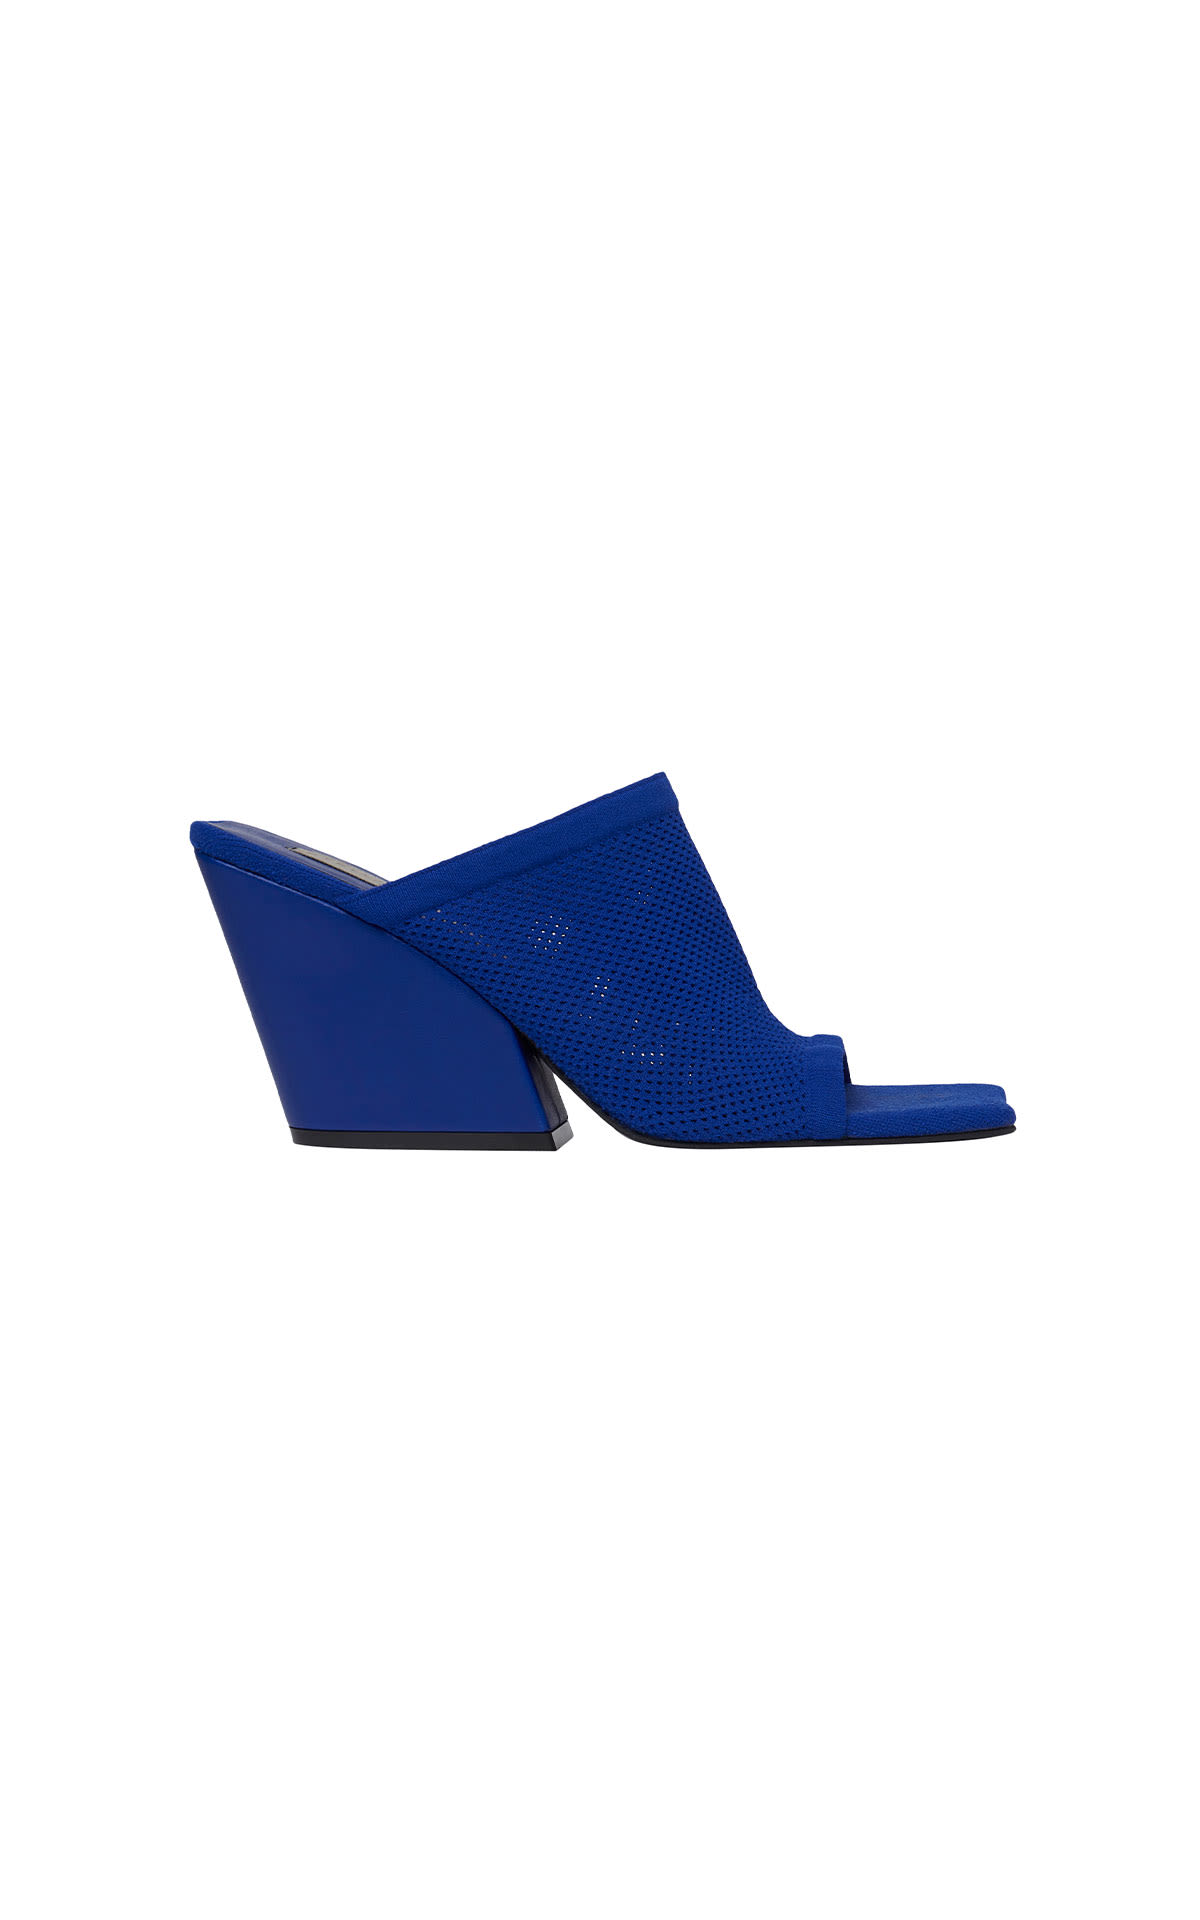 Stella McCartney Blue mesh knitted wedge from Bicester Village